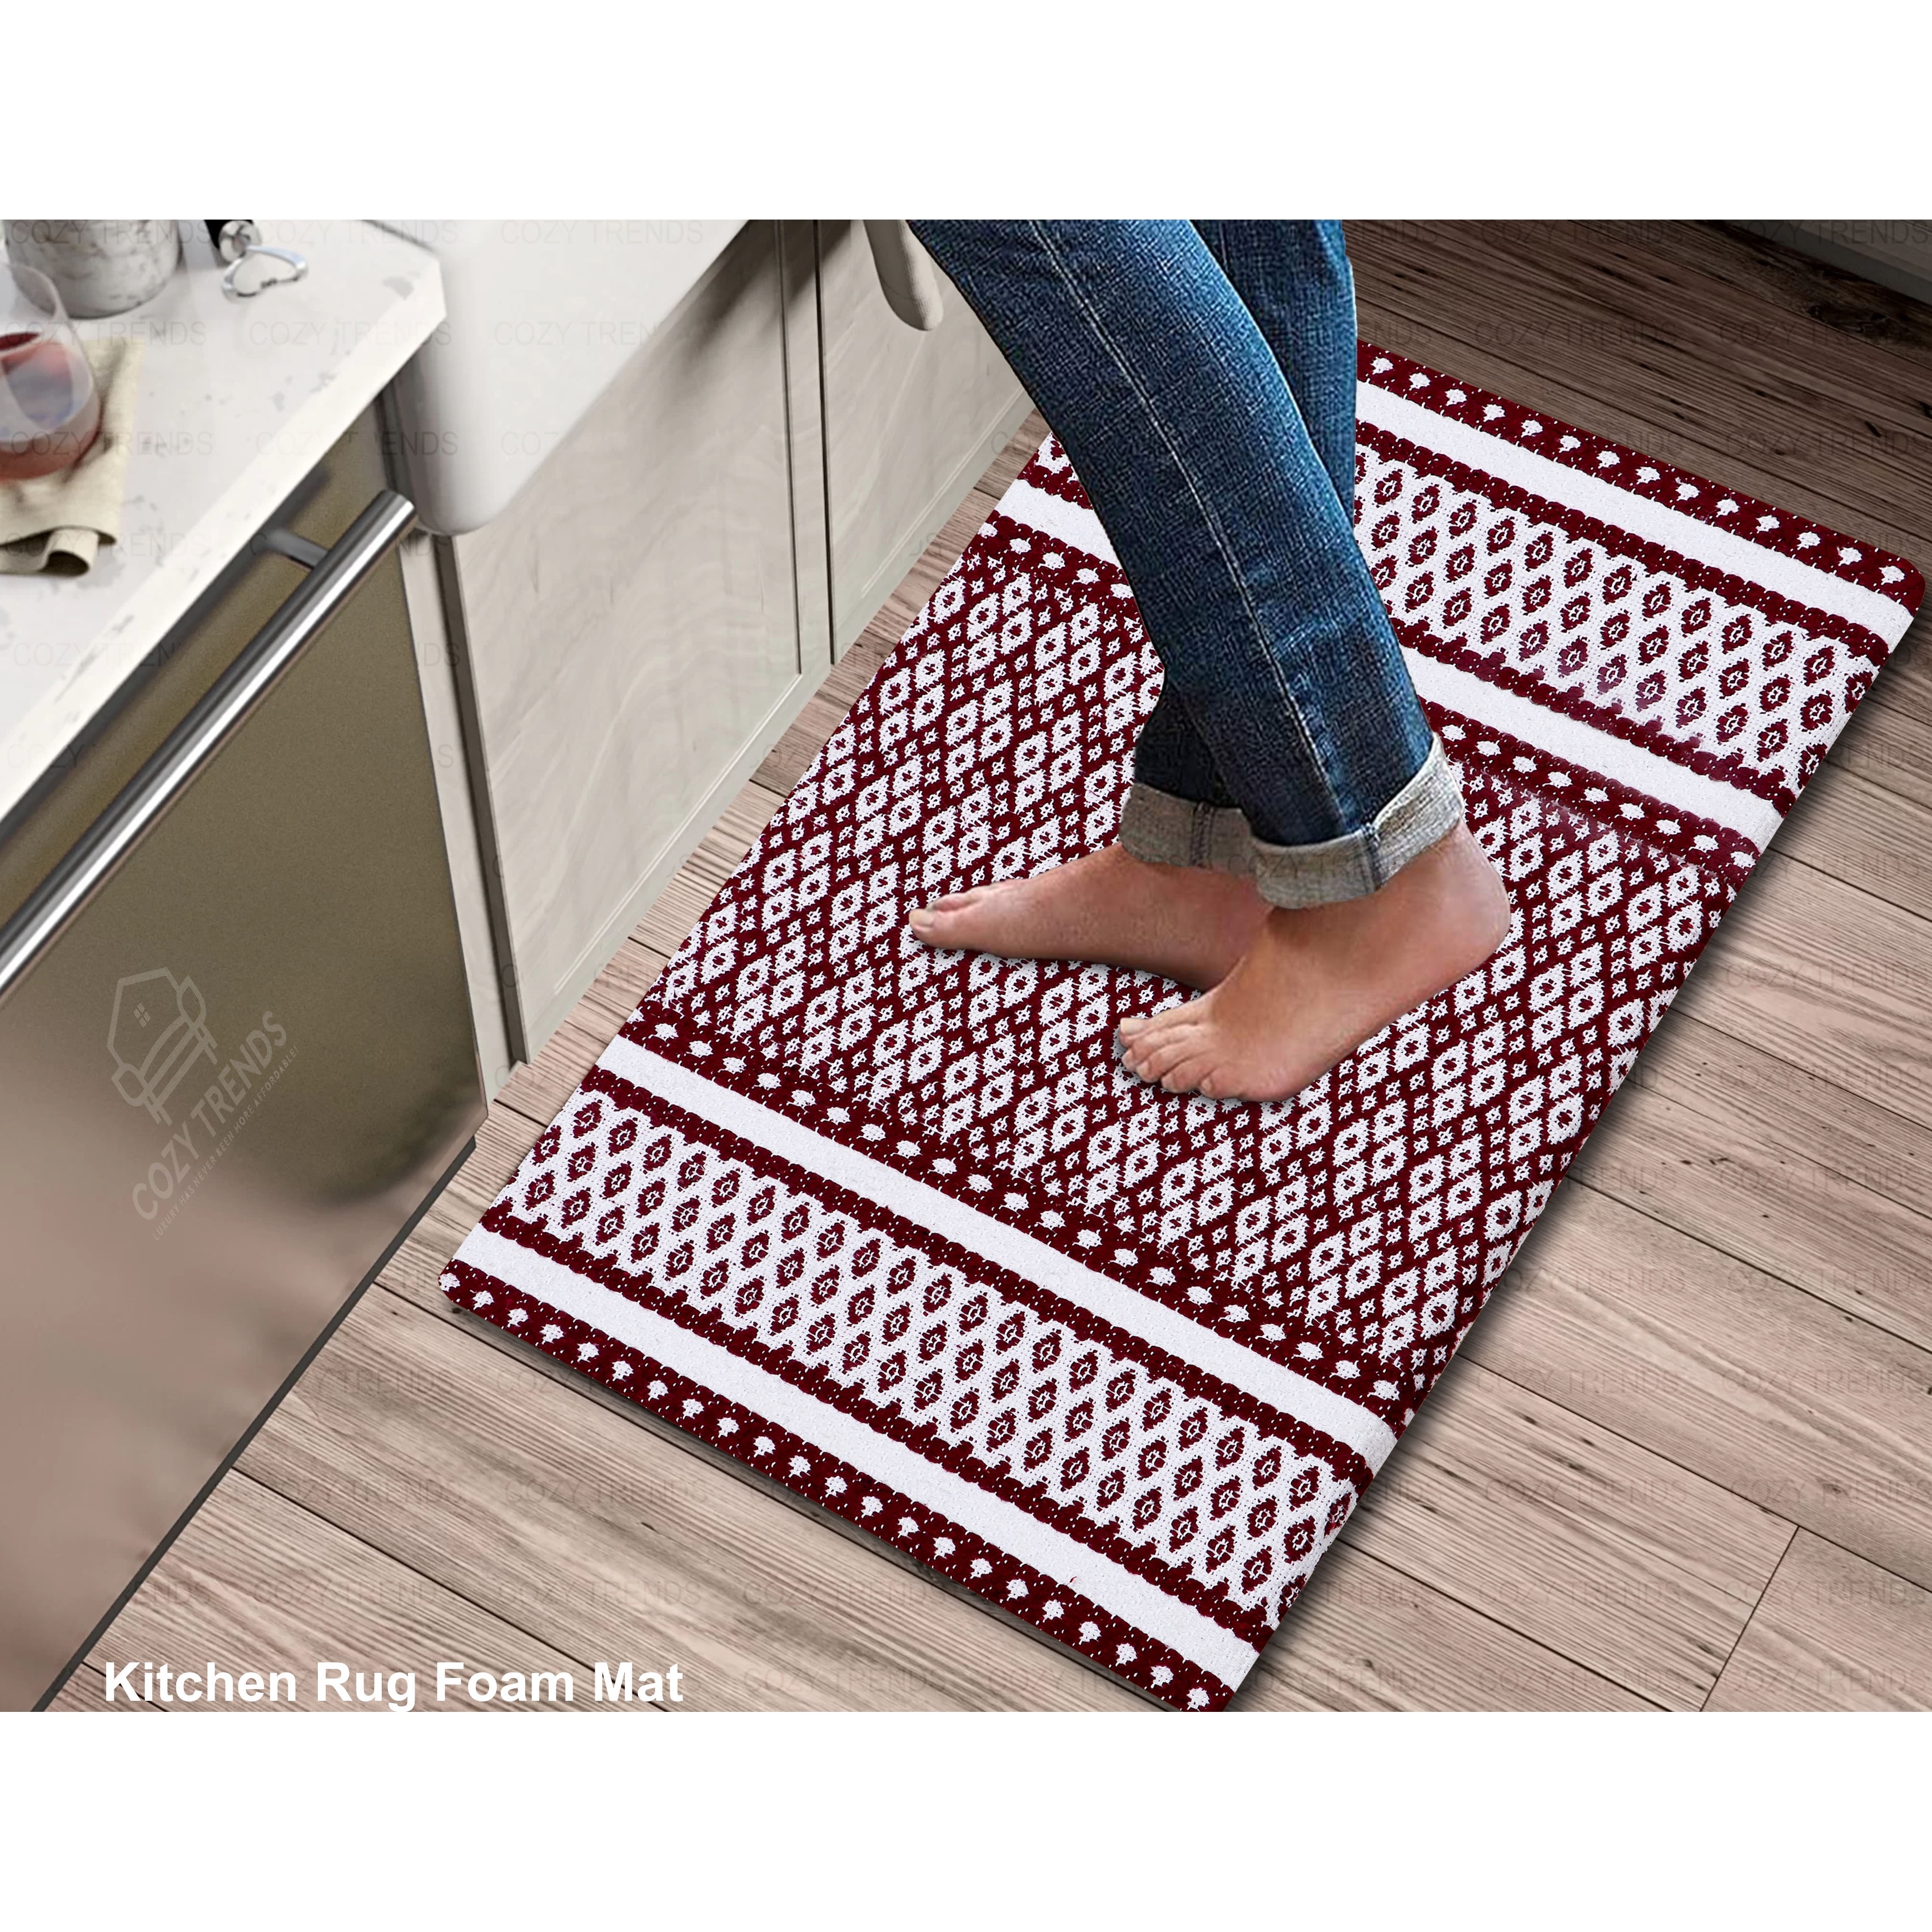 https://ak1.ostkcdn.com/images/products/is/images/direct/f313211141d7188f263ce3aa97e2526f84d670ca/Woven-Cotton-Anti-Fatigue-Anti-Skid-Cushioned-Kitchen--Doormat-Bathroom-Mats-%26-Runners.jpg